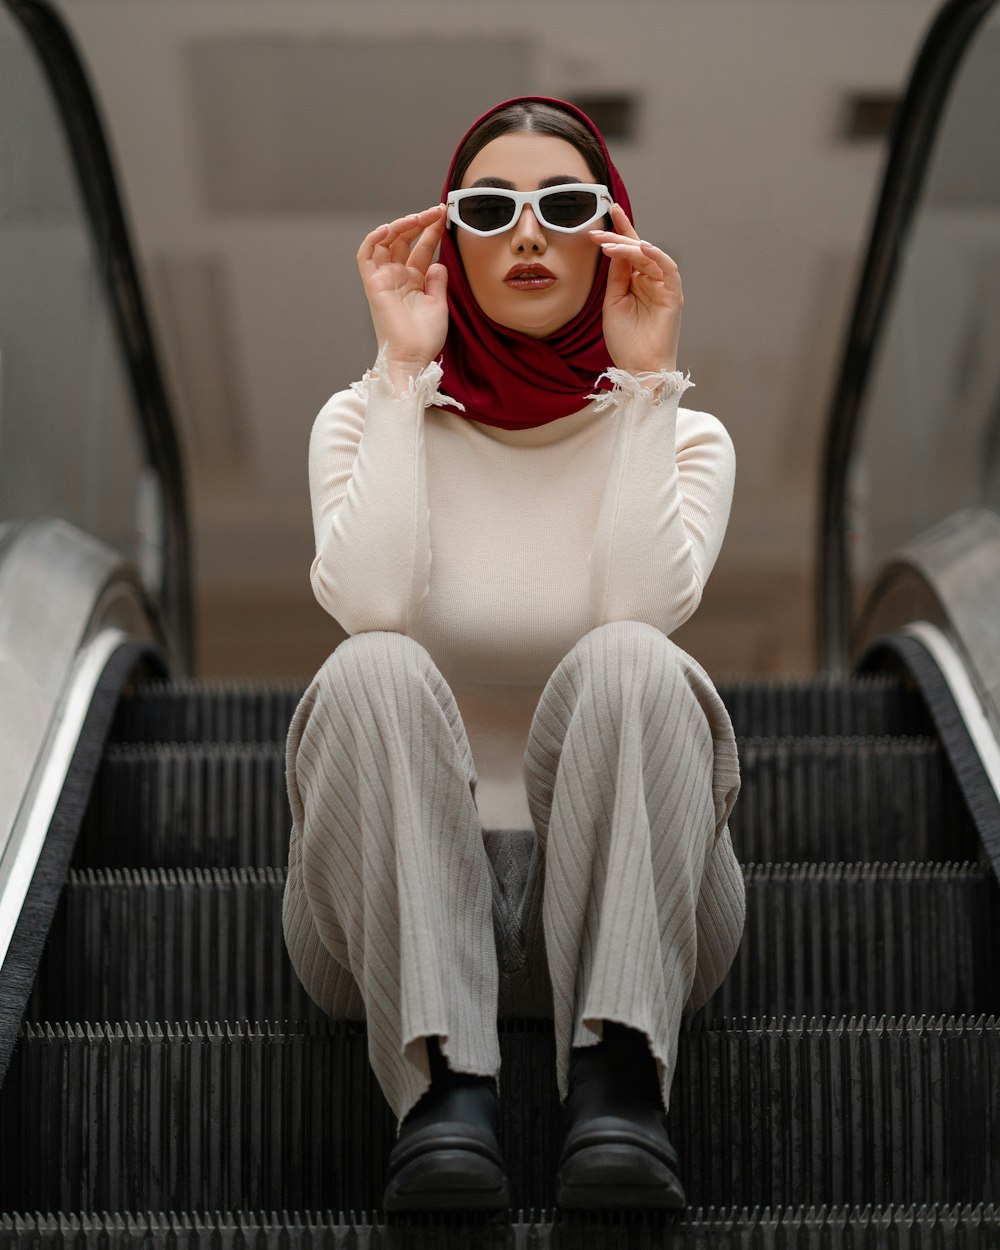 a woman sitting on an escalator wearing sunglasses and a scarf